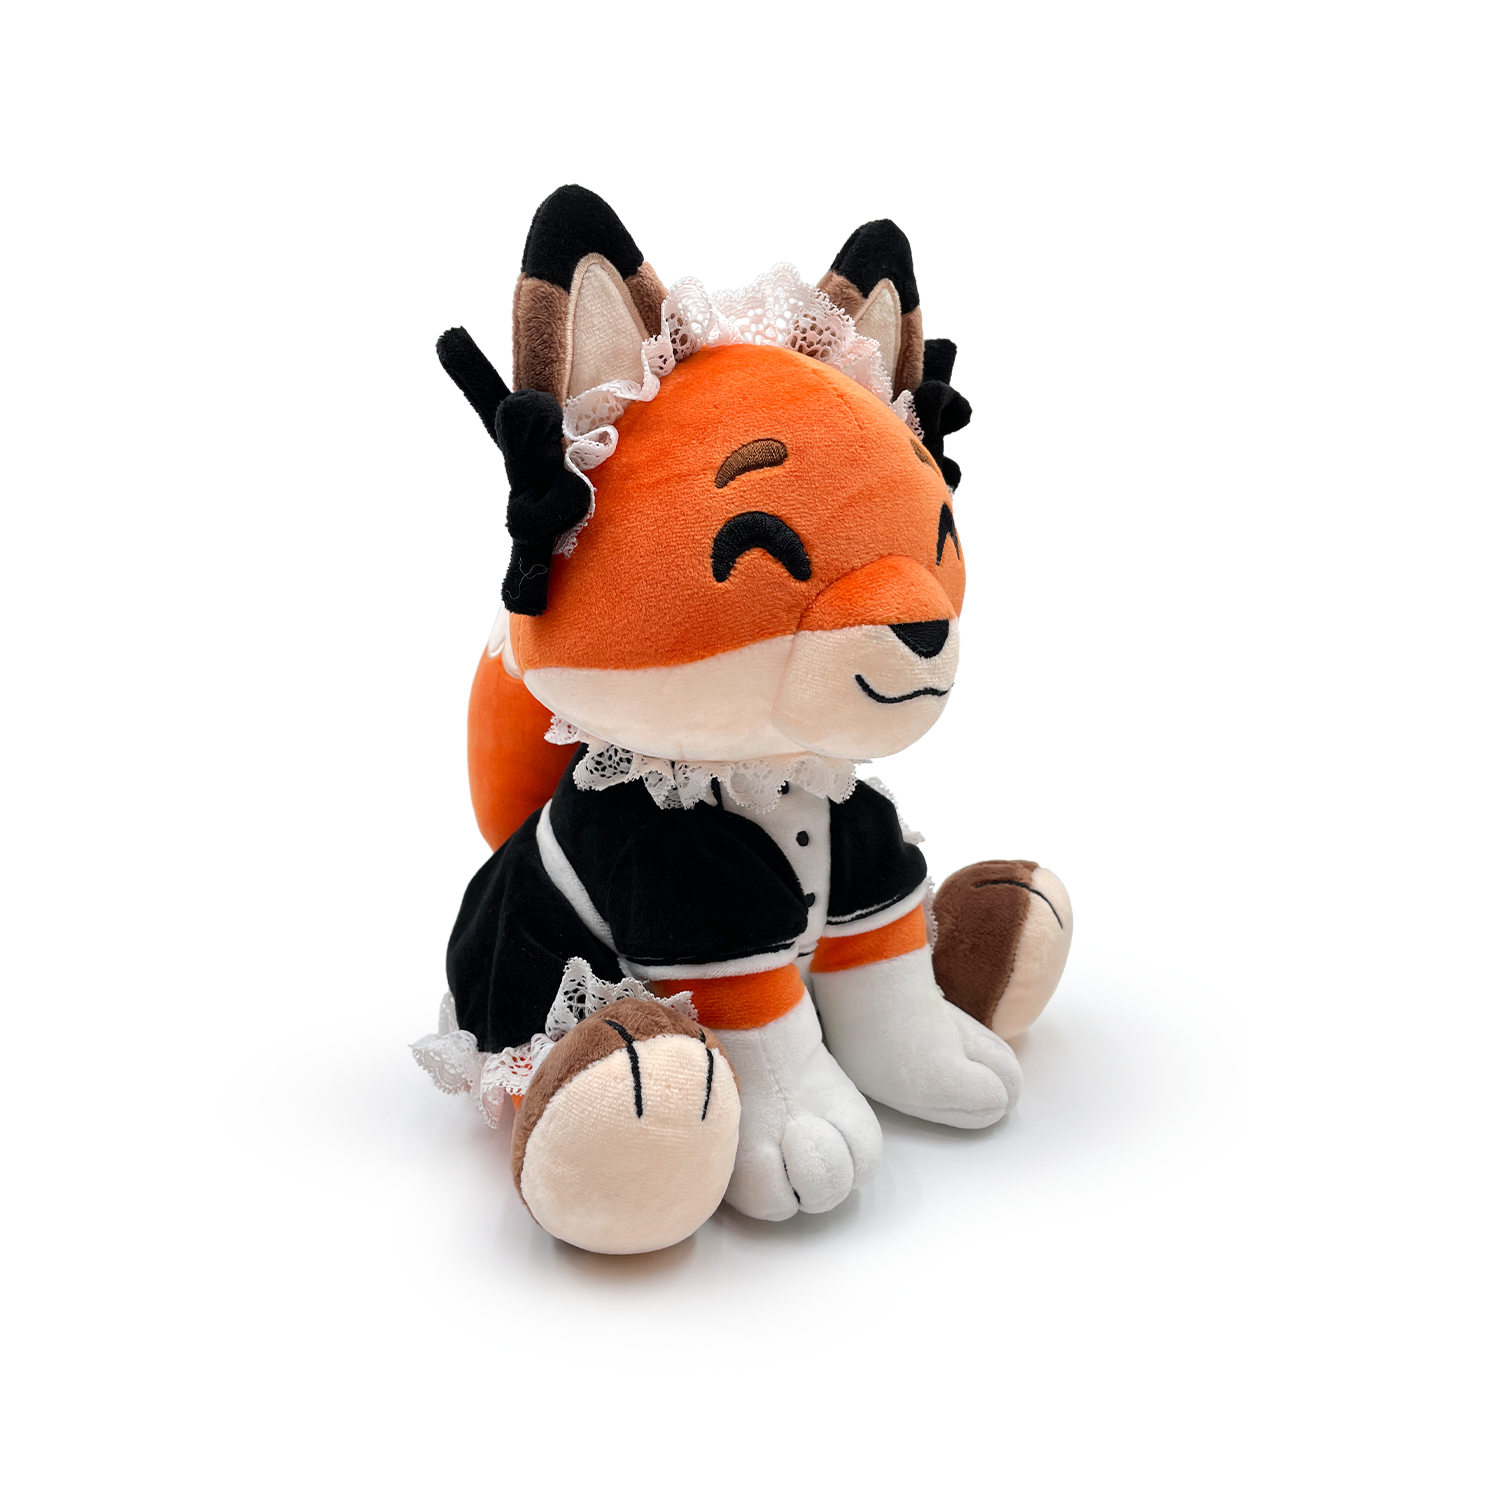 Youtooz Fundy Sit Plush, 9 Inches, Dreamsmp Minecraft plsuh, comes with box